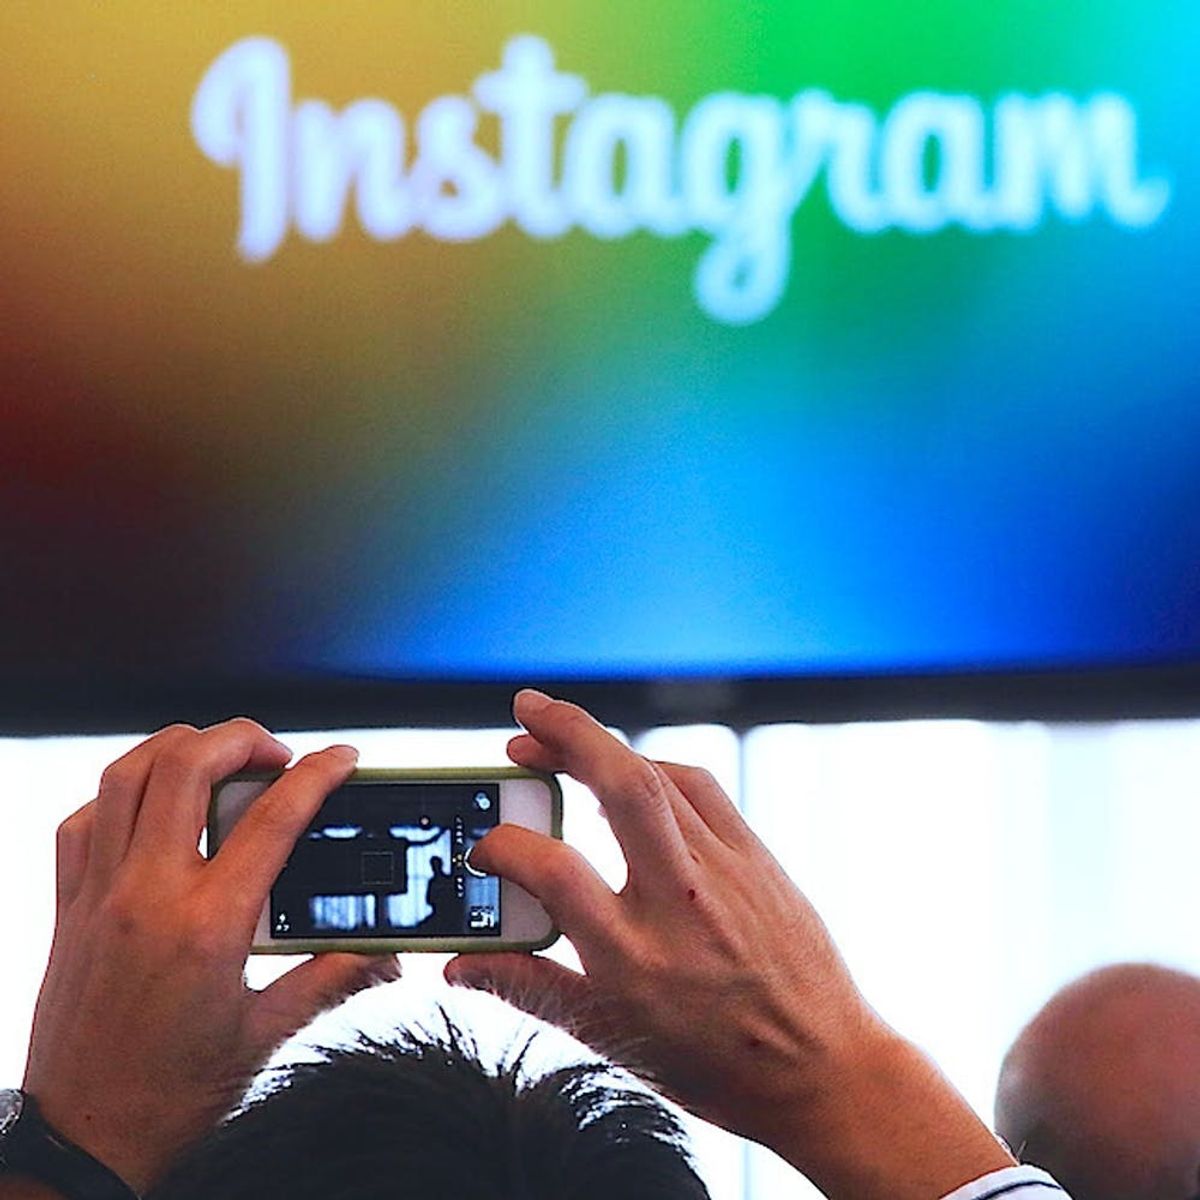 The Latest Instagram Update Has a Cool Trick You Need to Know